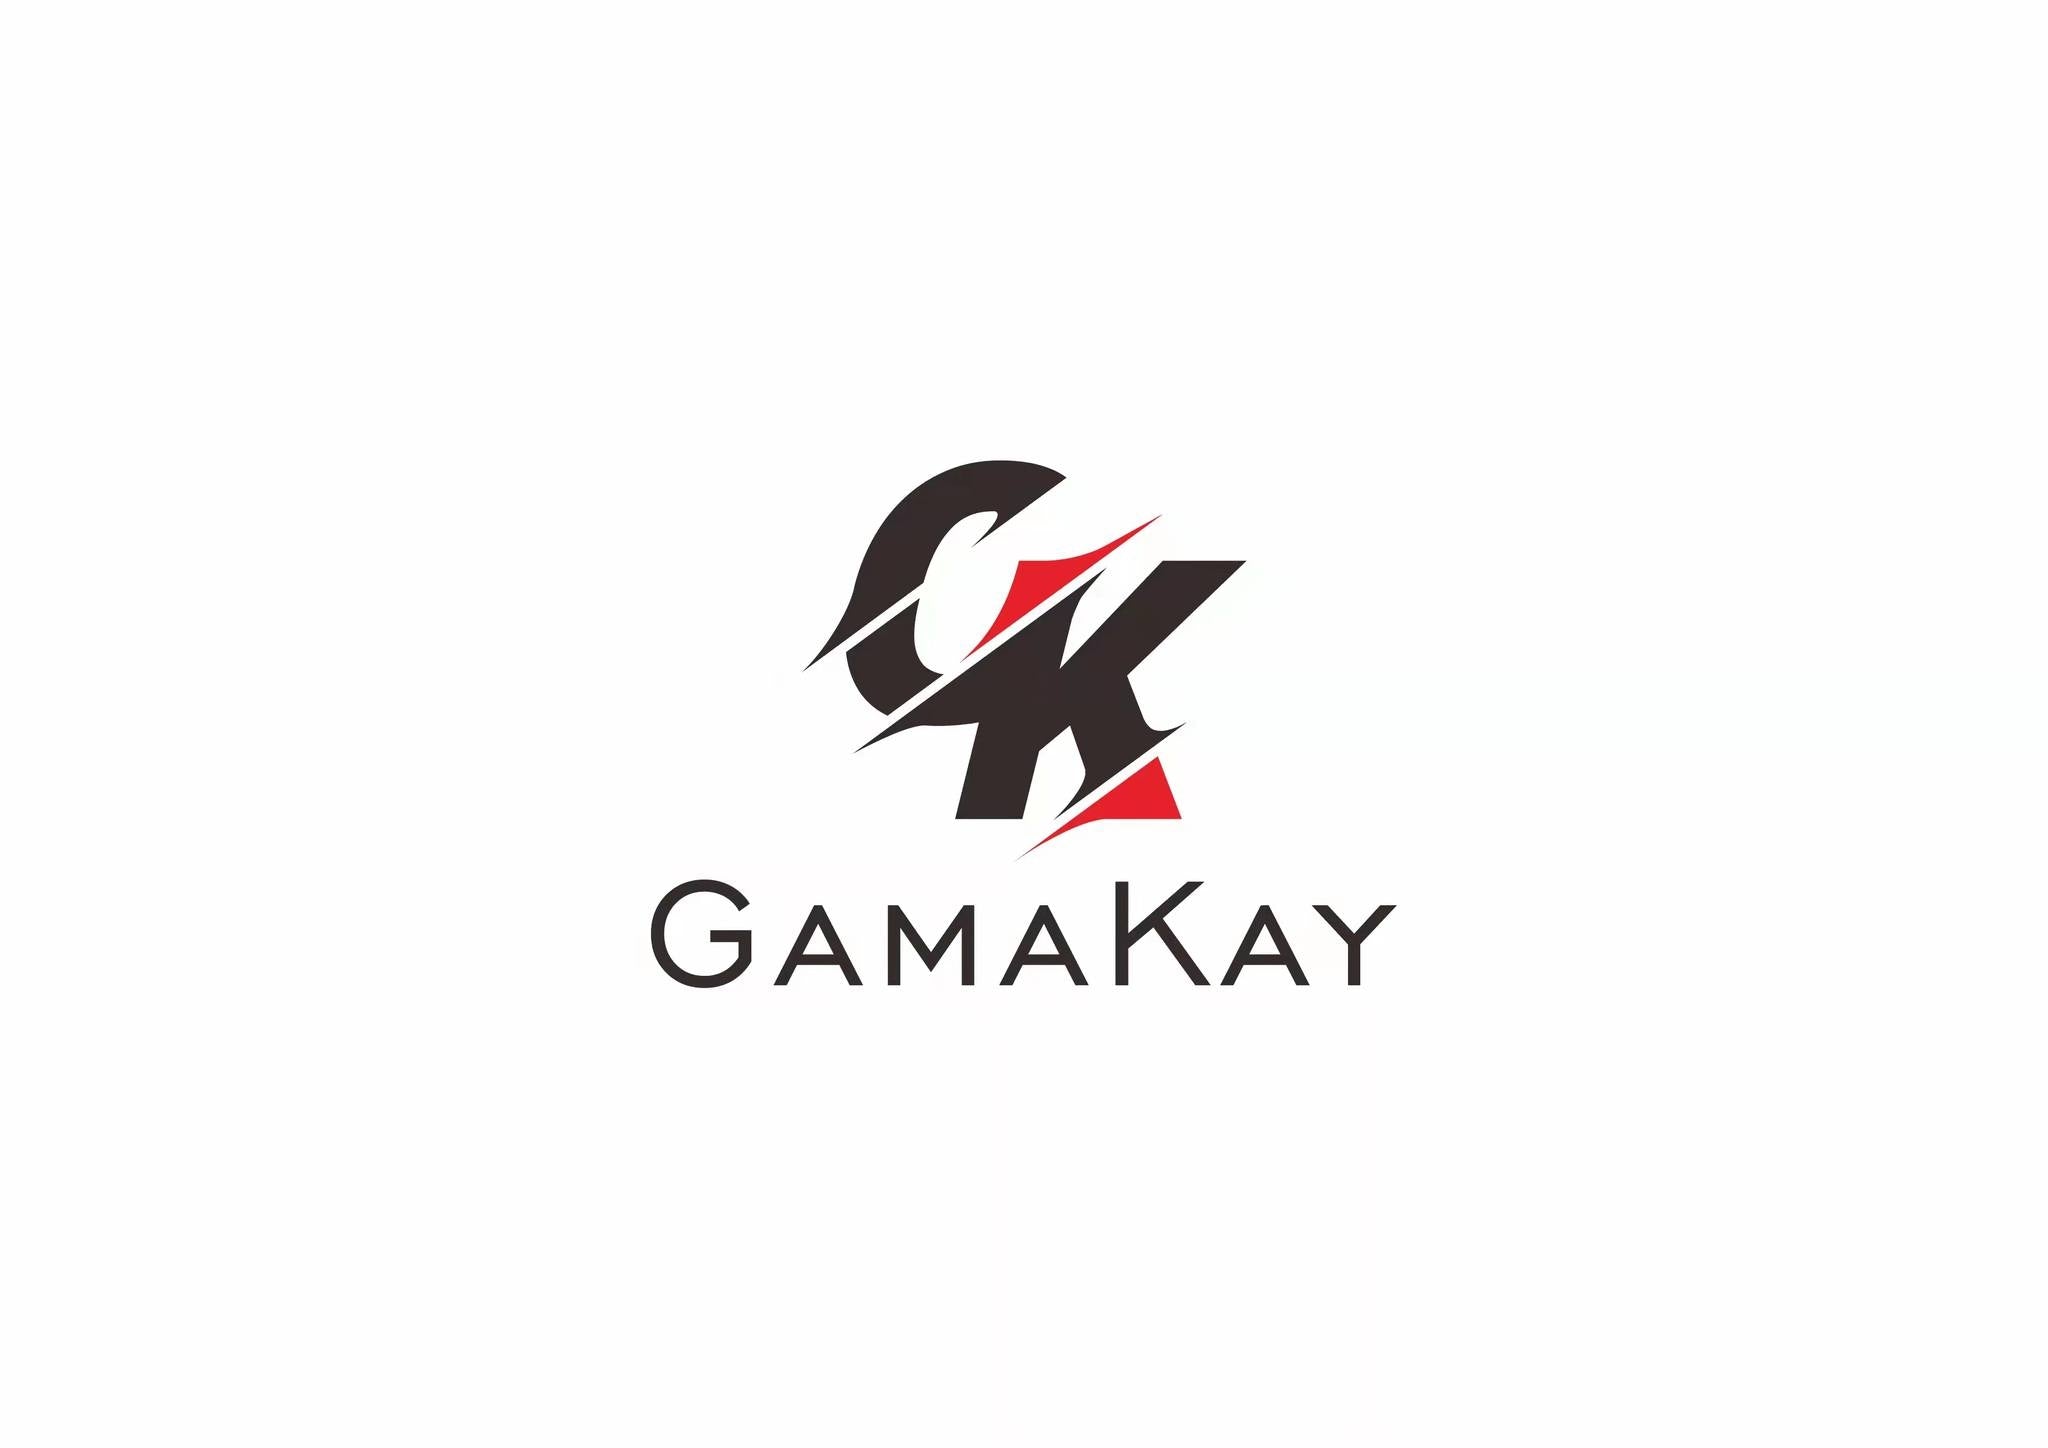 Massive Savings on Gamakay Keyboards - Limited Time Offers Inside!